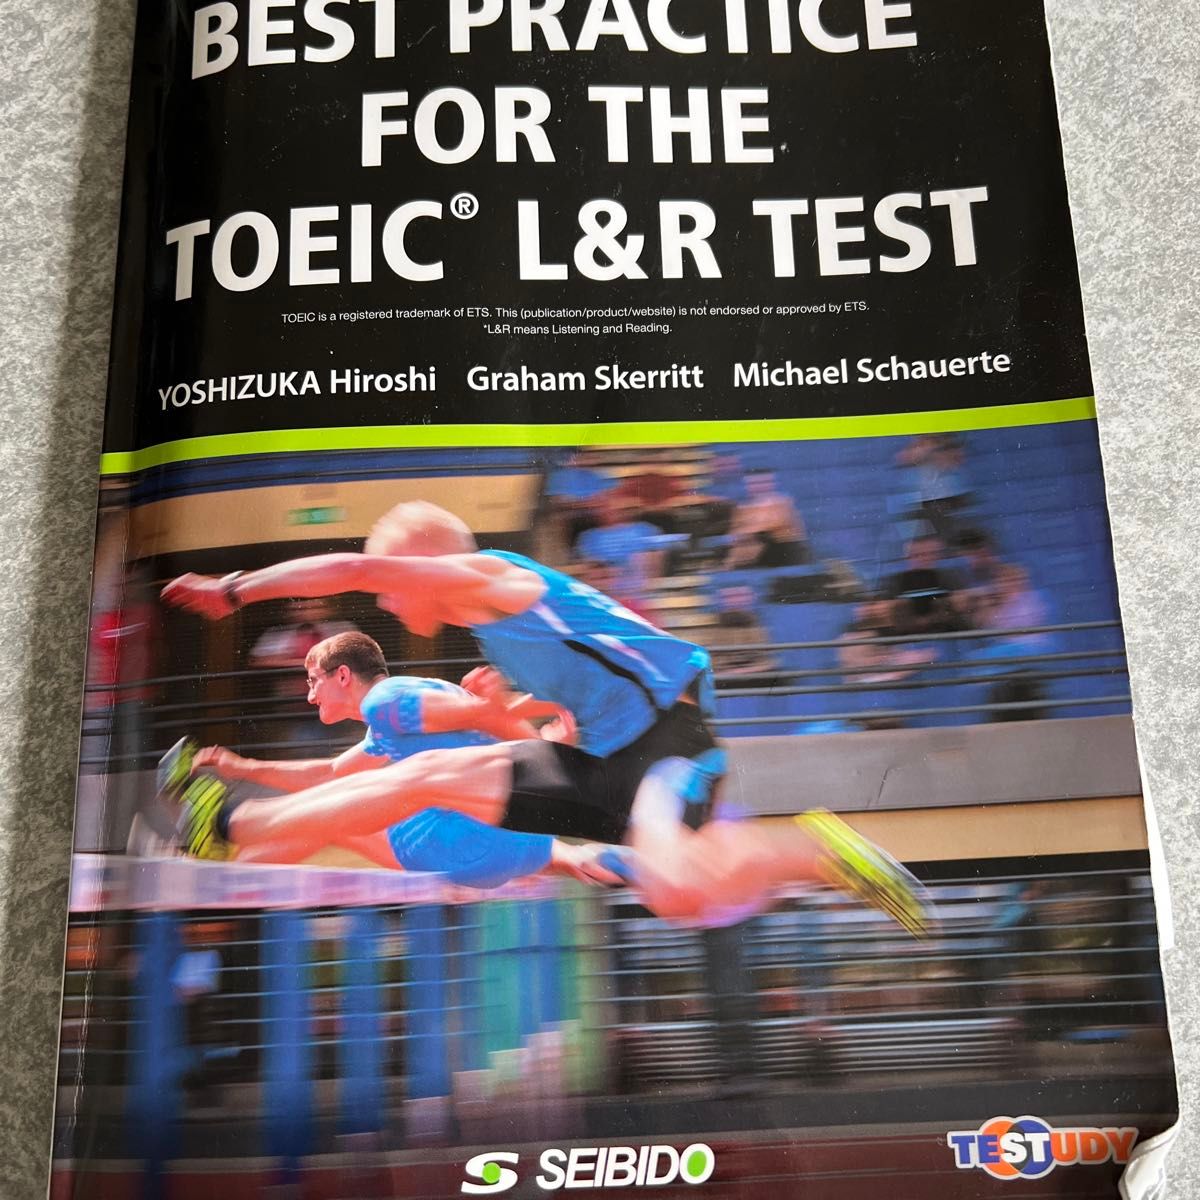 BEST PRACTICE FOR THE TOEIC L&R TEST